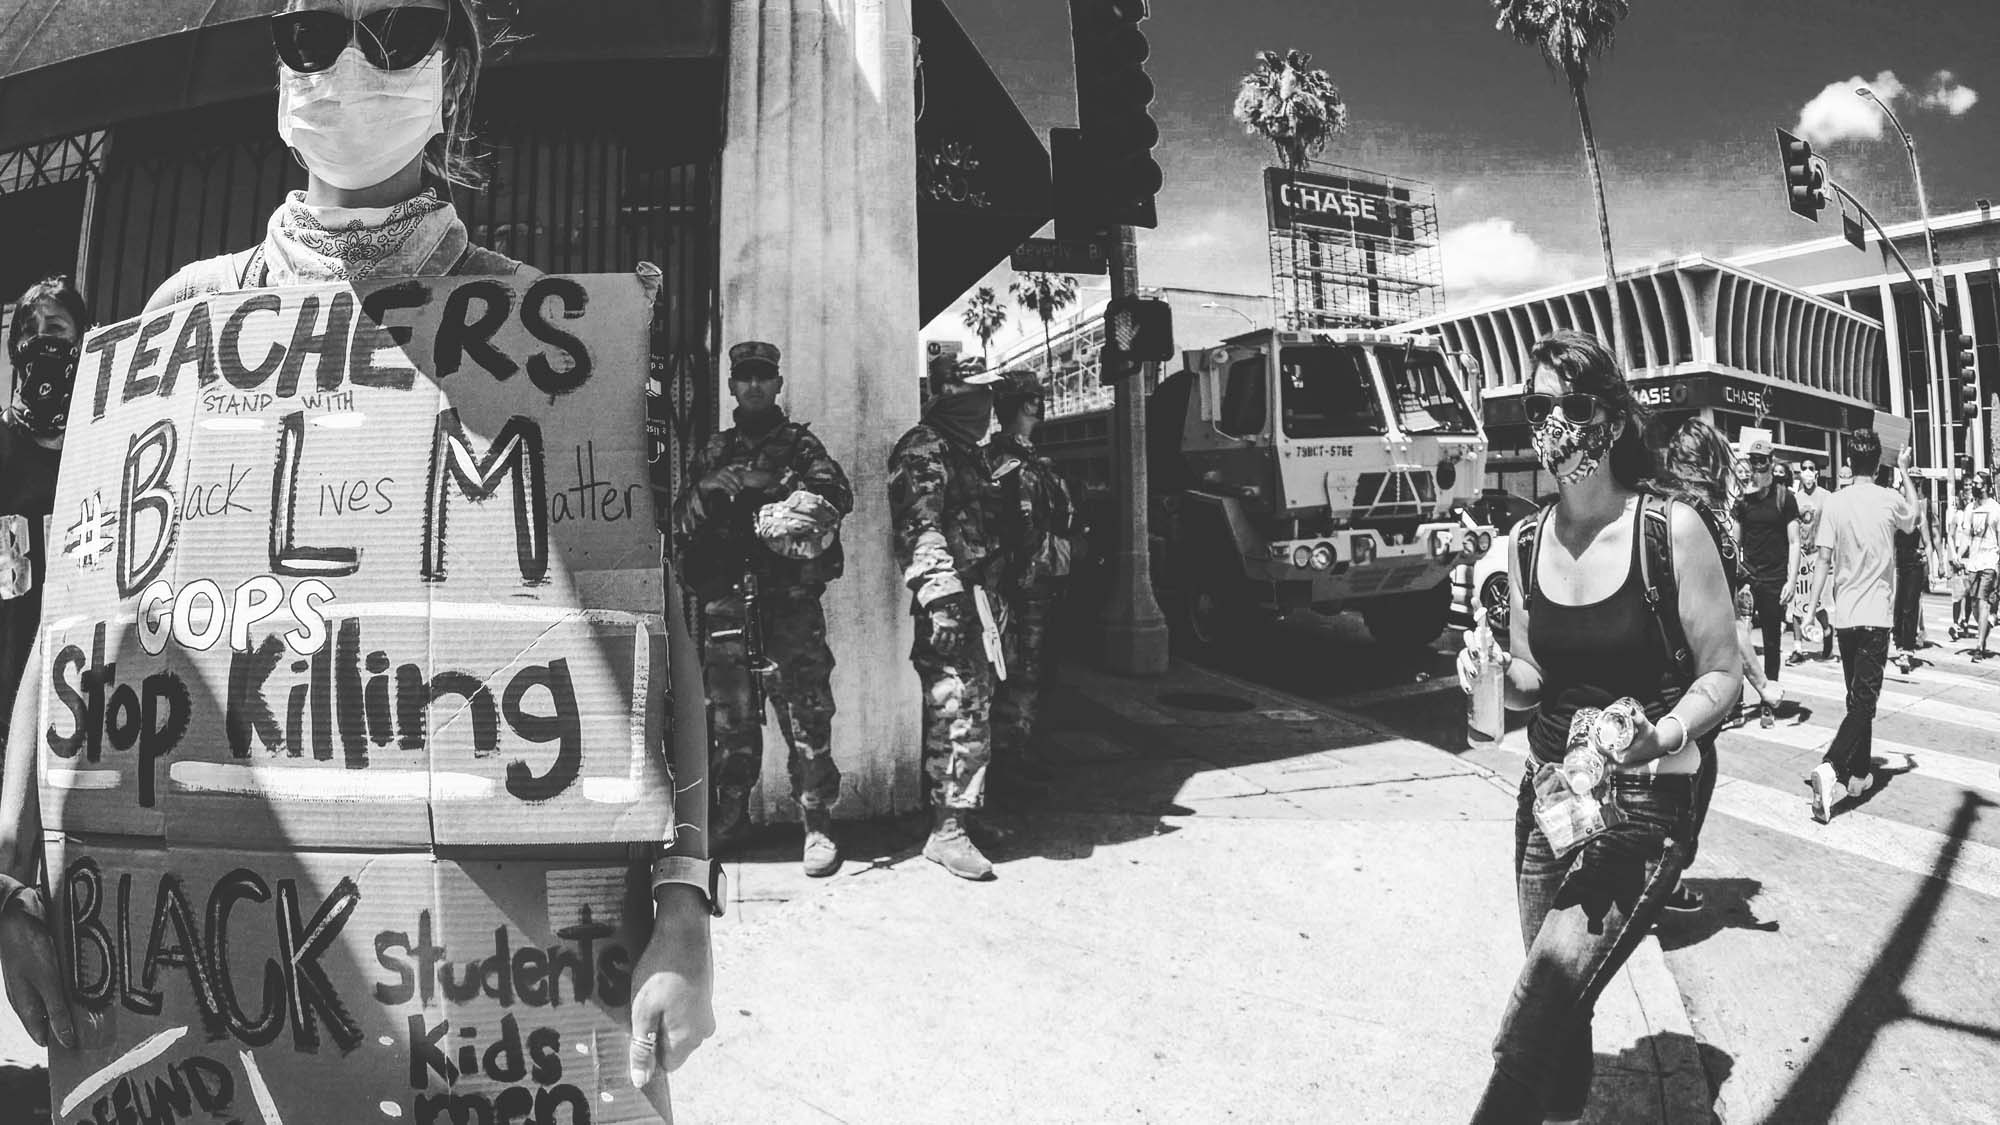 Protests signs, the National Guard, armored military vehicles and a woman walking around with hand sanitizer. This was easily the most sanitary protest in history.